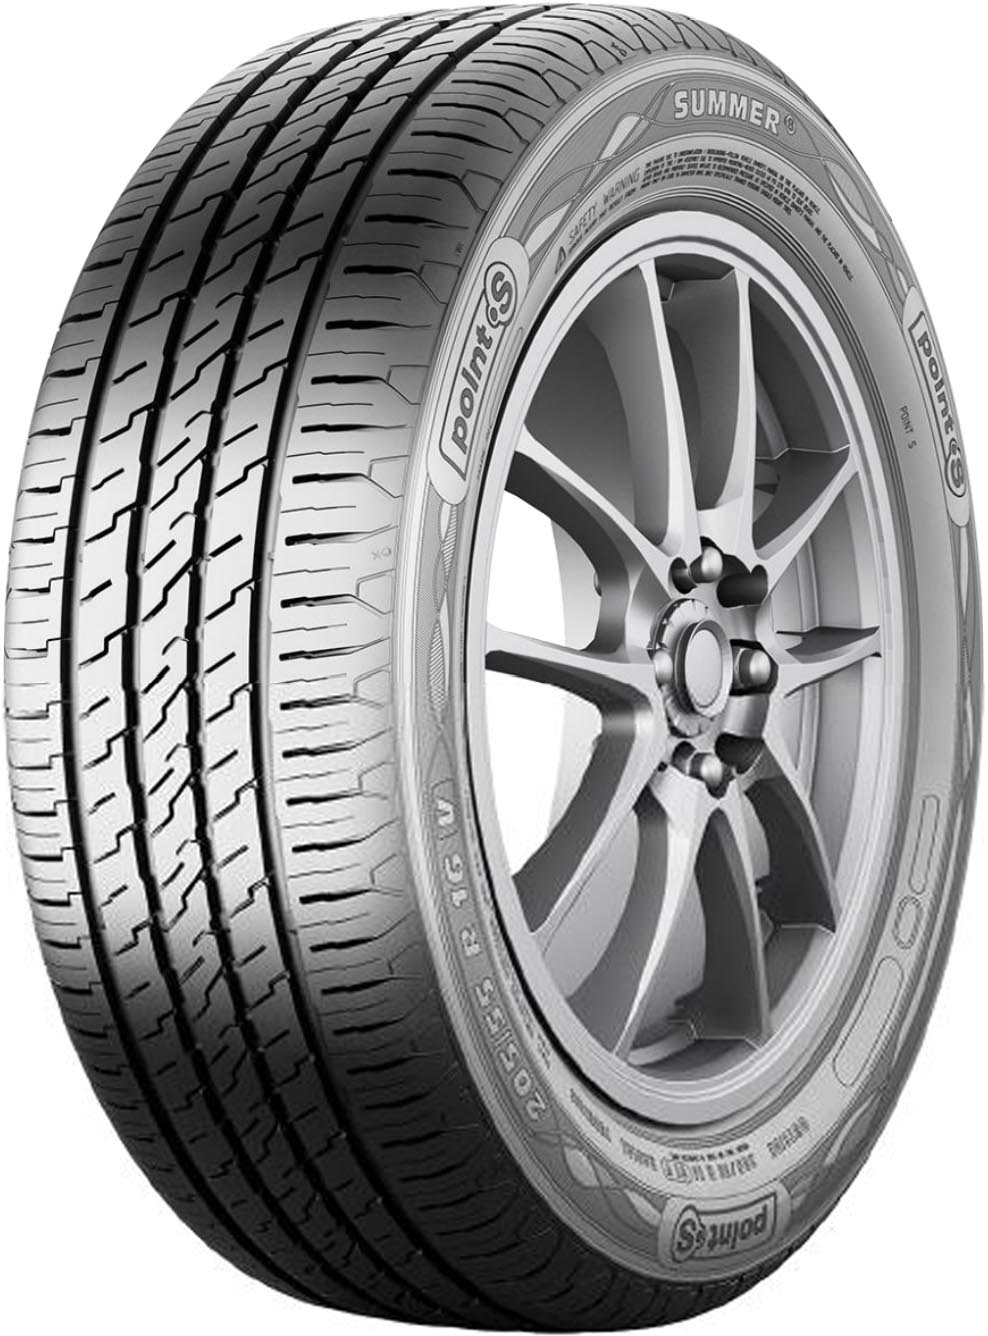 POINTS SUMMER S 165/70R13 79T